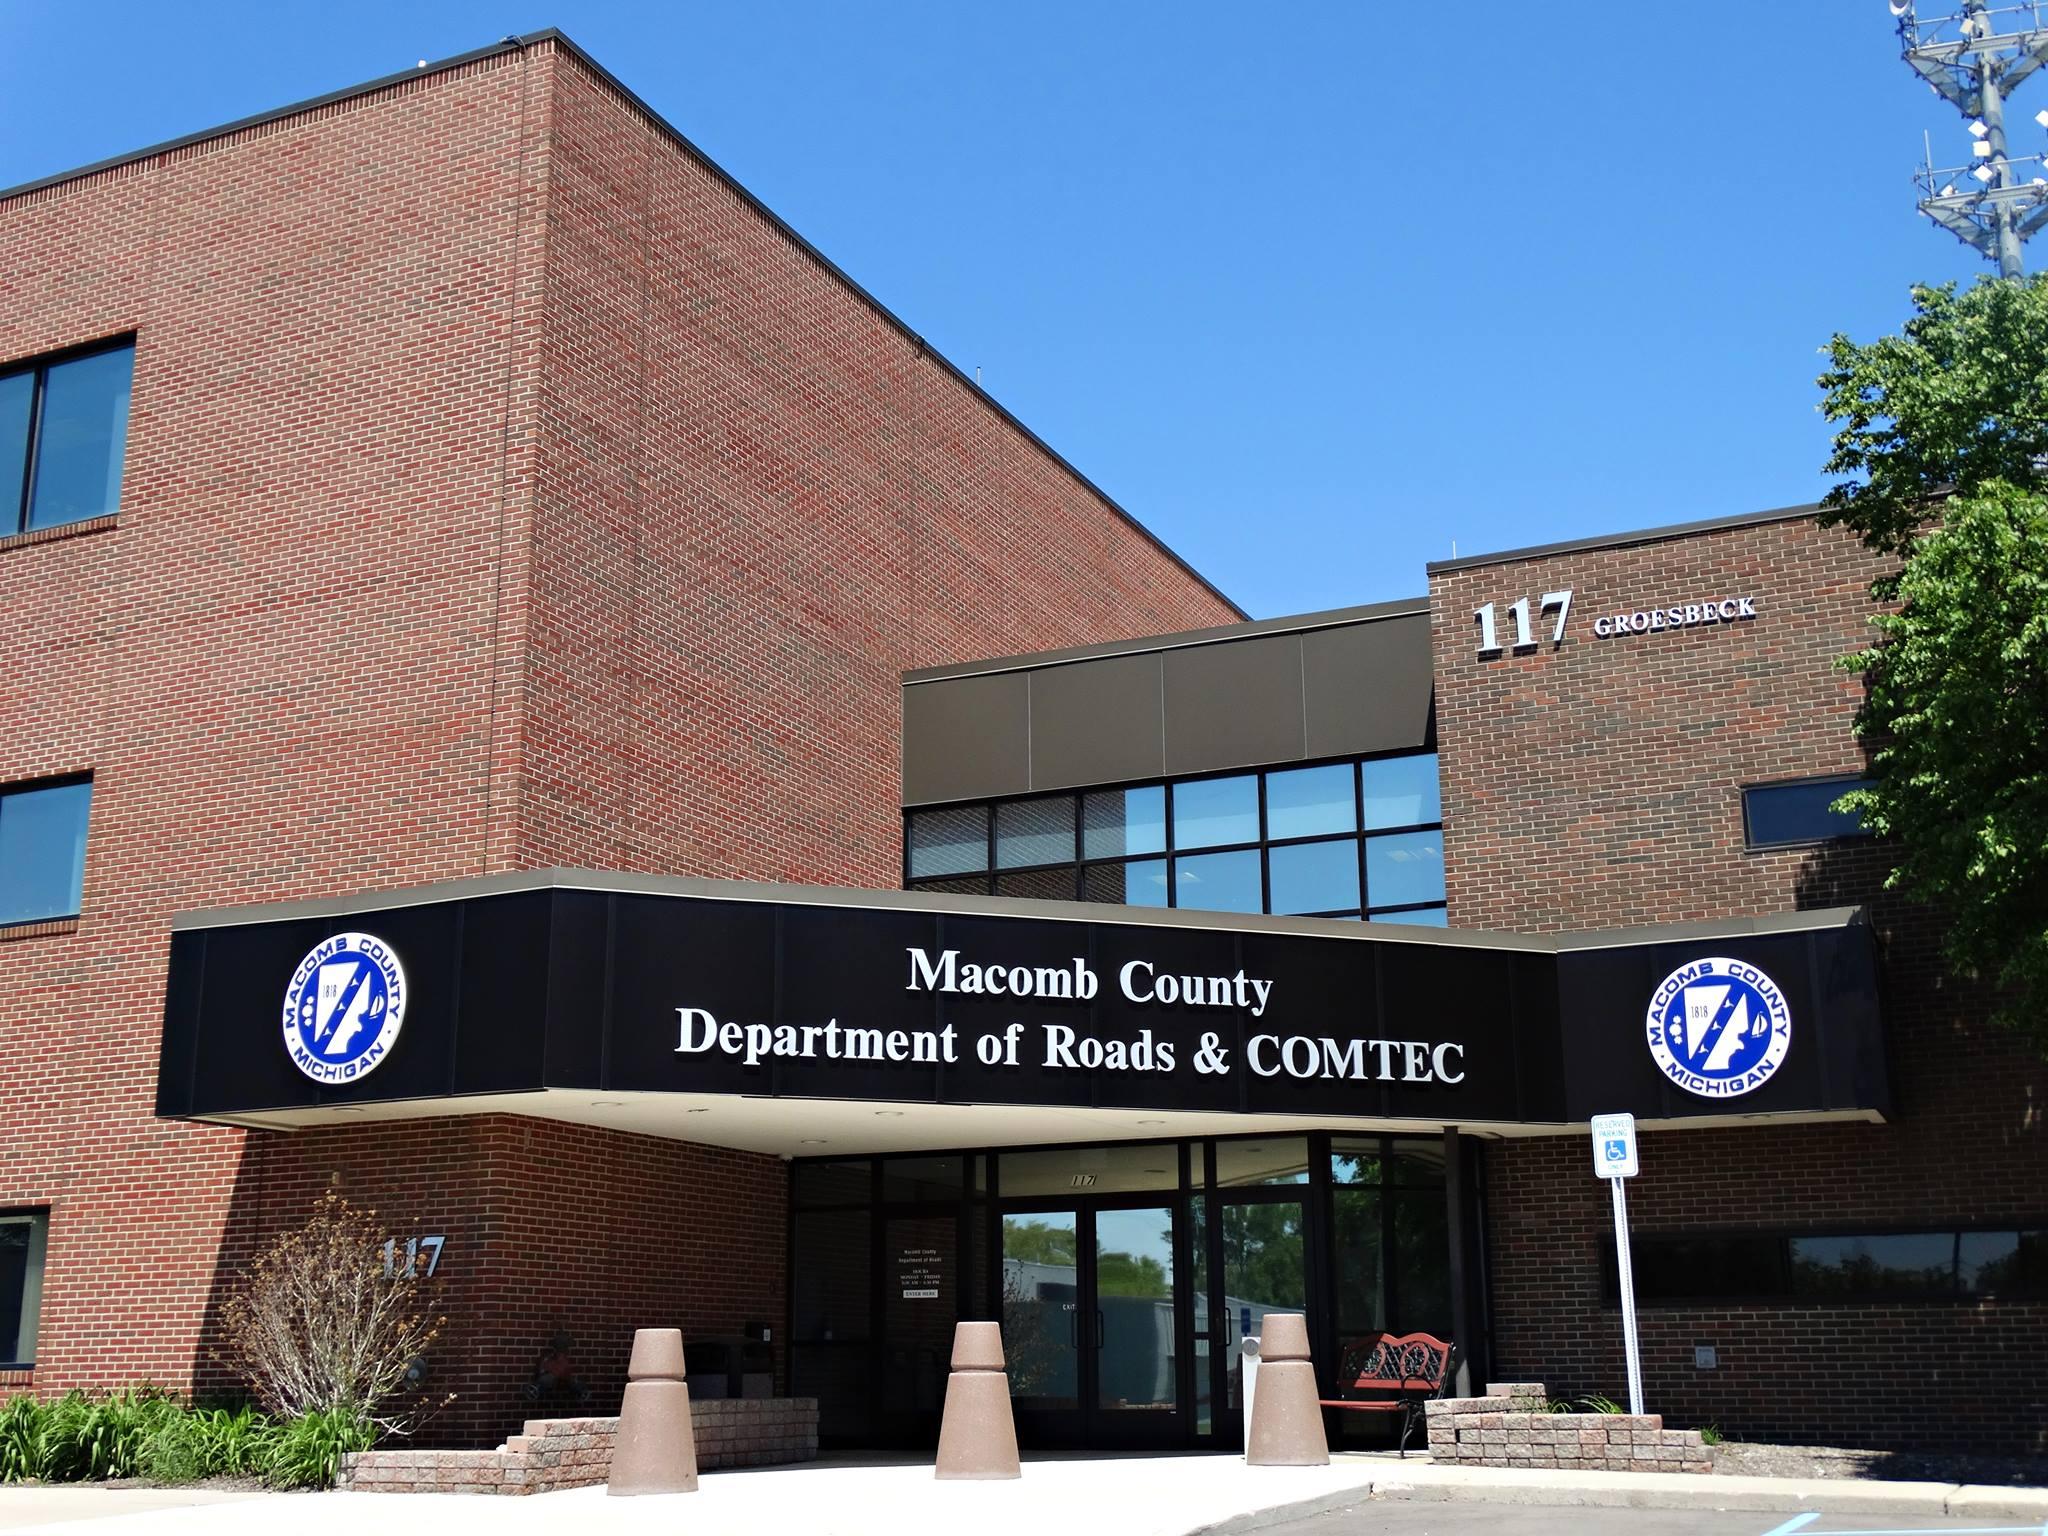 Macomb County Department of Roads building.